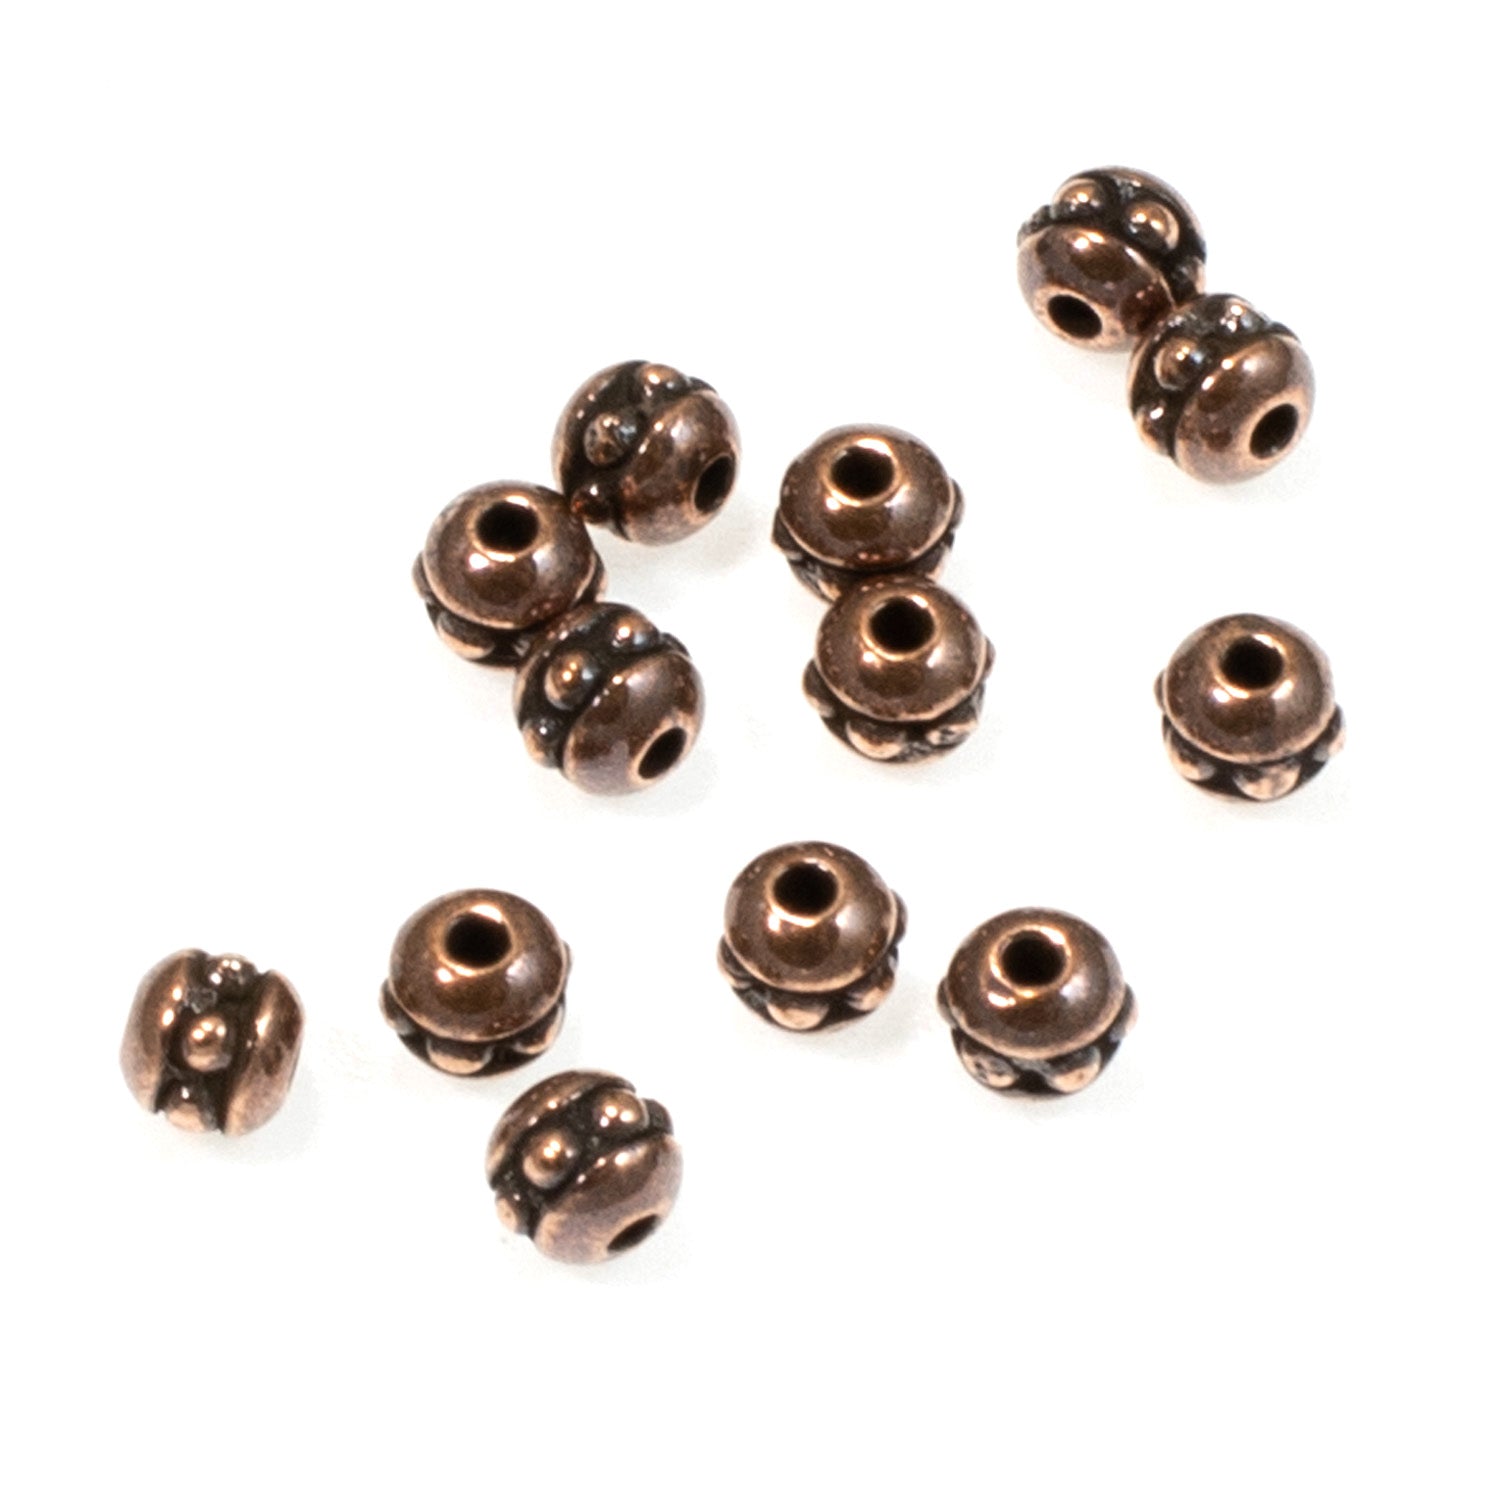 100 Pcs 8x4mm Copper Oval Tiny Beads Small Tube Beads Shiny Copper